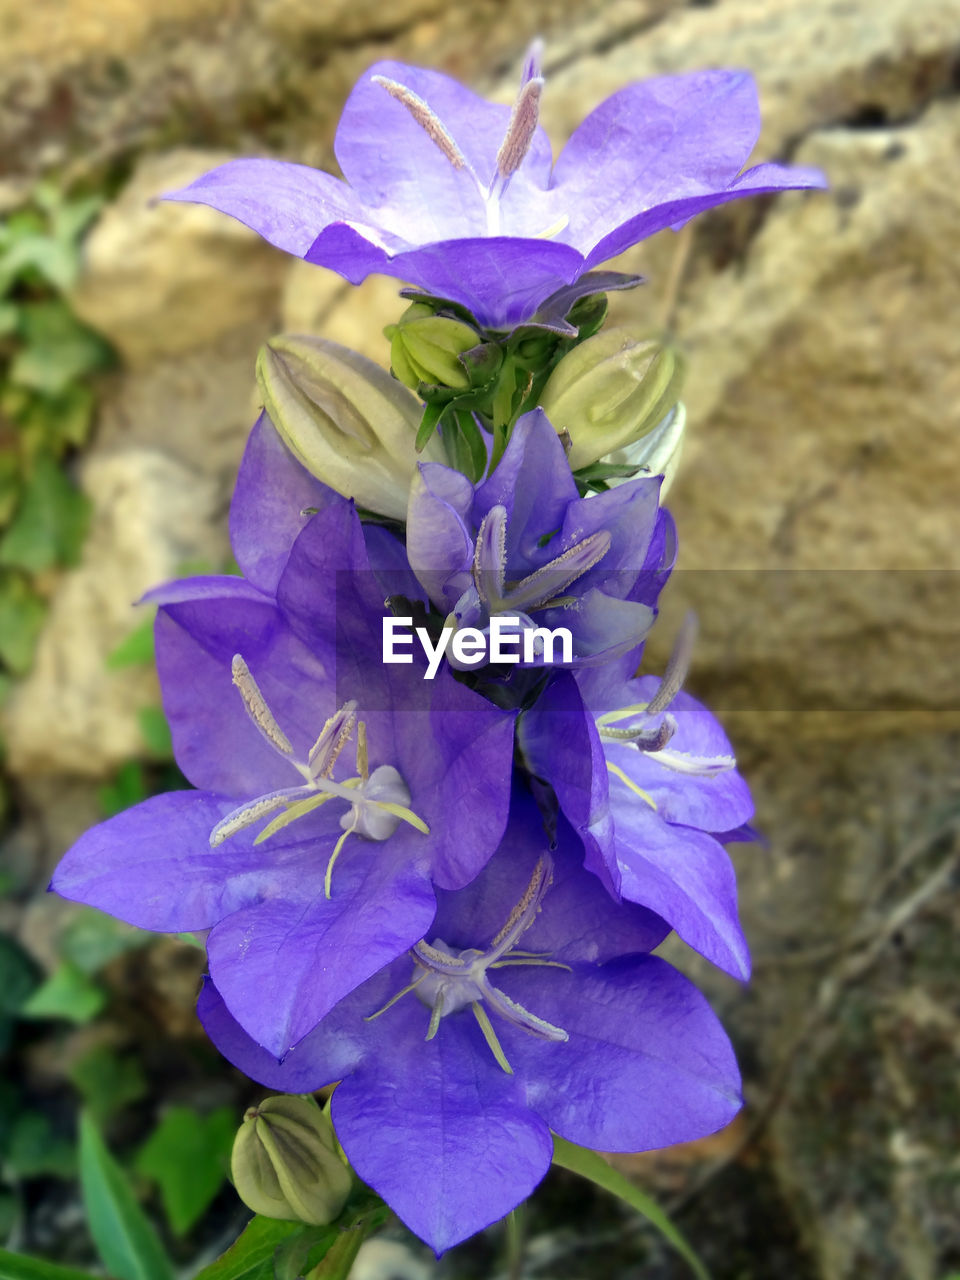 flowering plant, flower, plant, purple, beauty in nature, freshness, fragility, close-up, petal, growth, inflorescence, nature, flower head, focus on foreground, no people, wildflower, day, outdoors, iris, botany, springtime, blossom, plant part, leaf